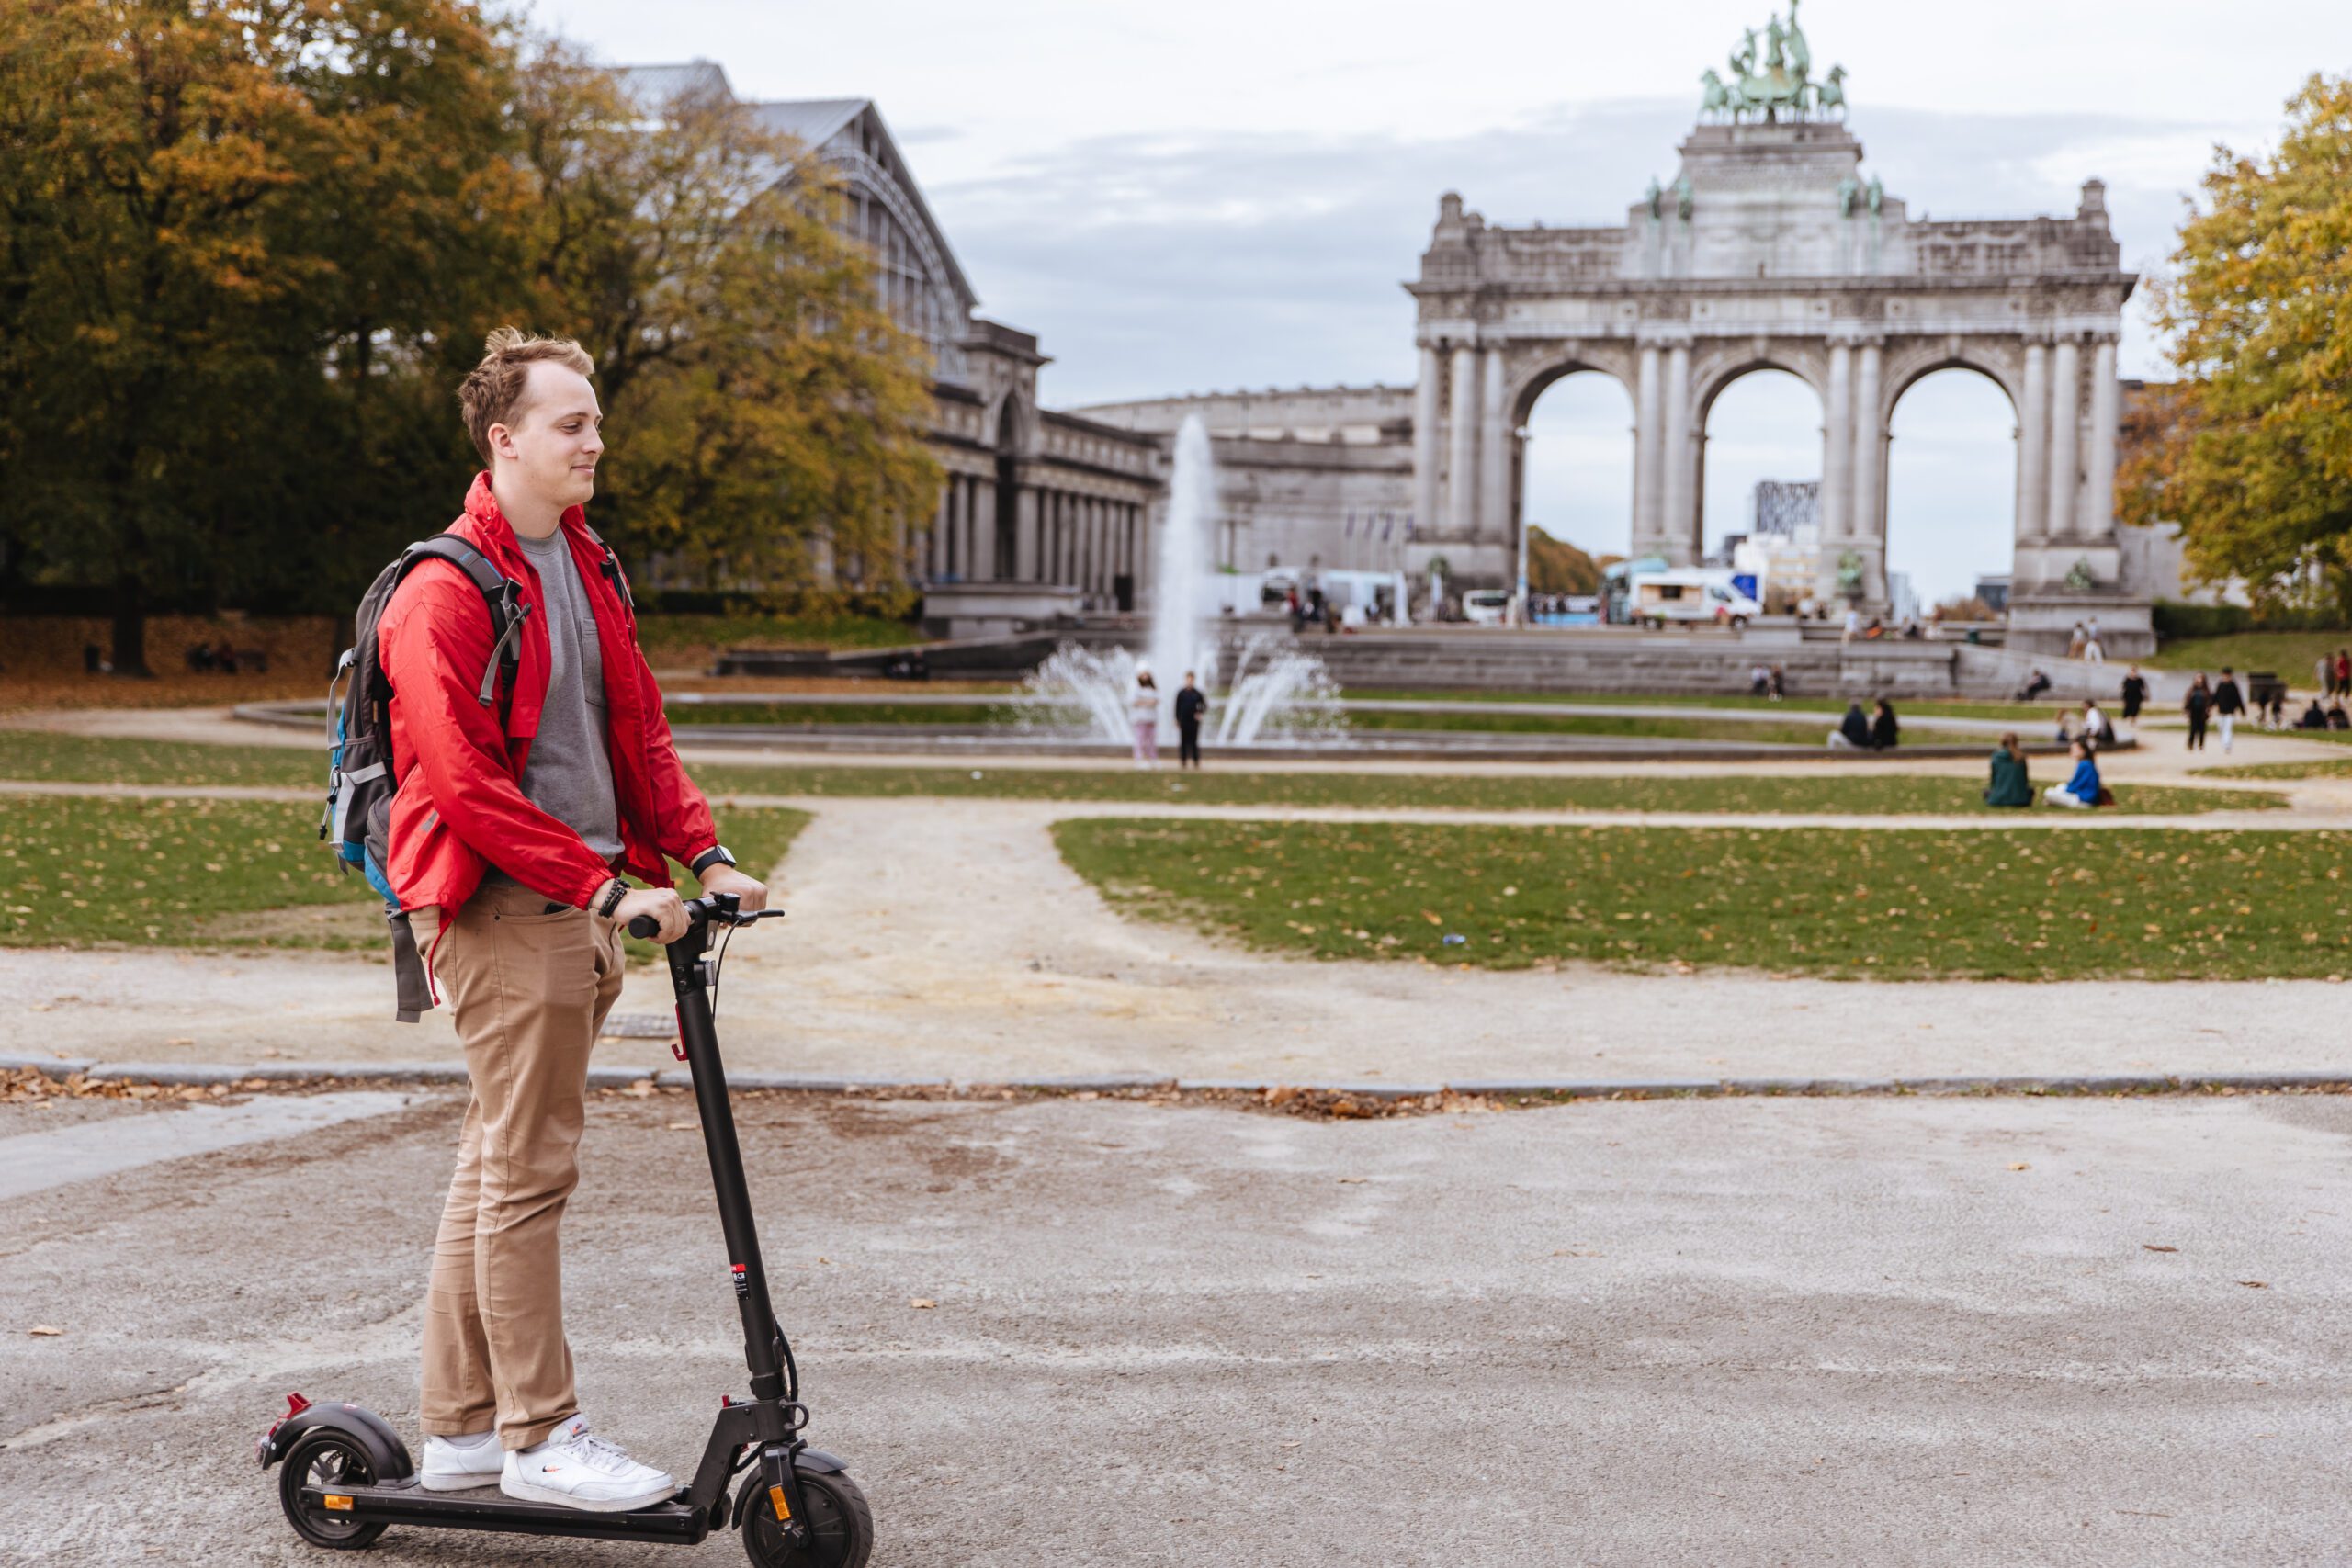 Want to try an electric scooter? Floya to the rescue!